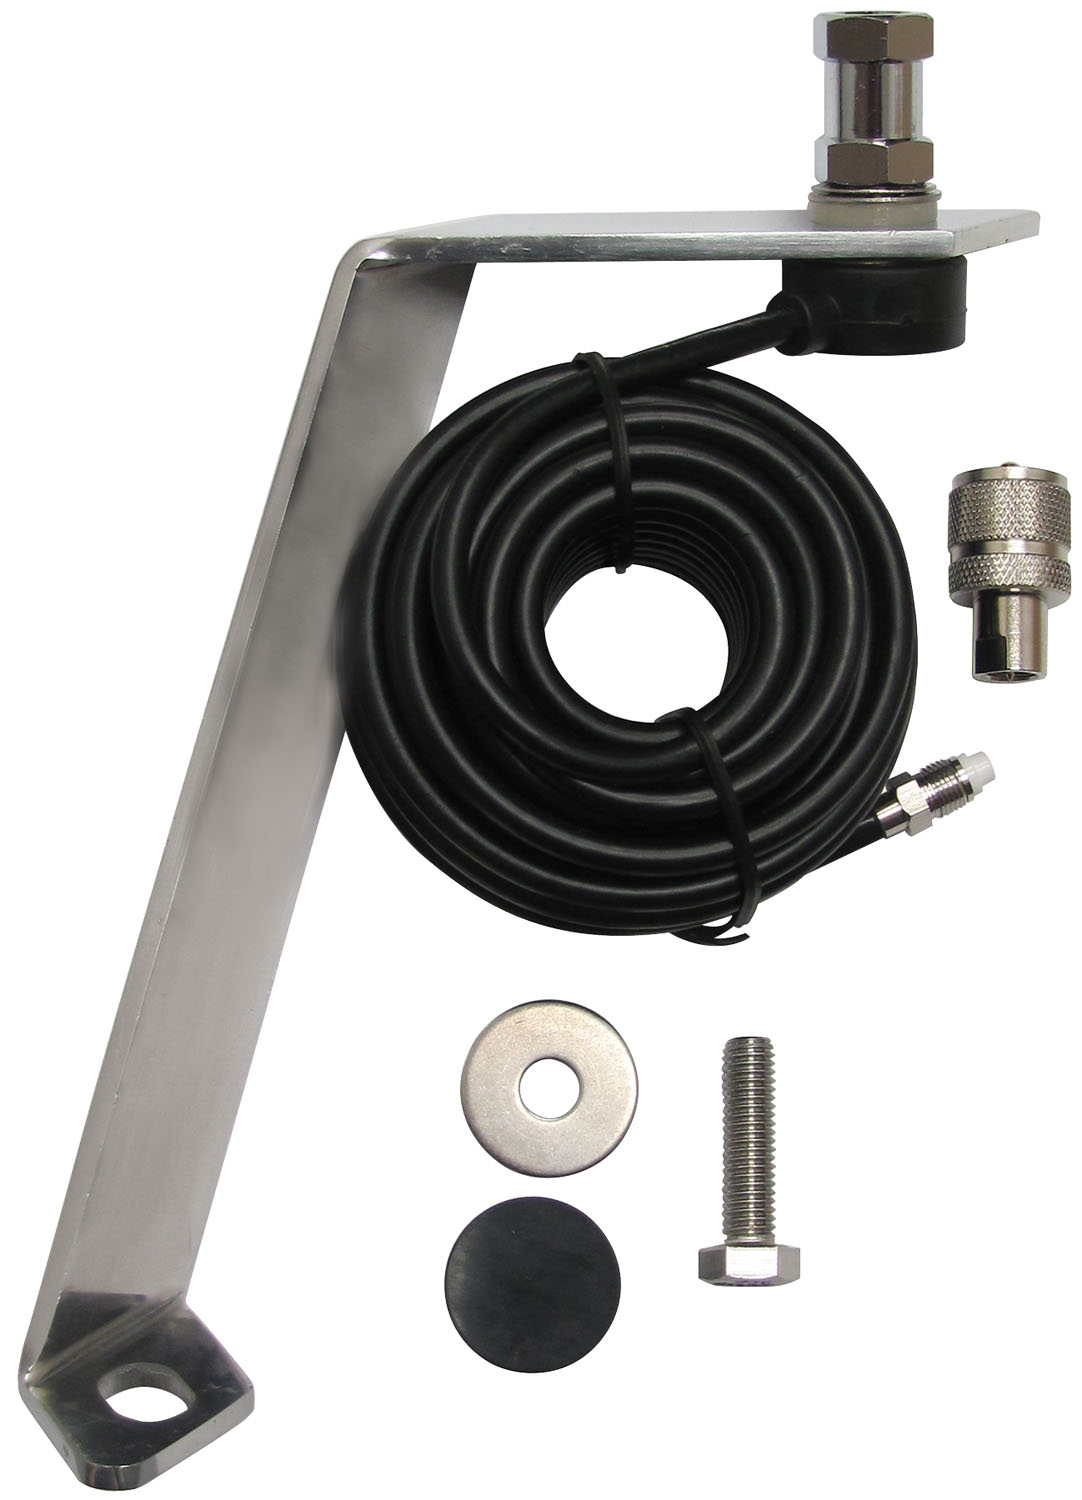 Procomm - Ford F150 2015 & Up Hood/Fender Mount With 18 Feet Weather Resistant Coaxial Cable & Quick On Pl259 Connector